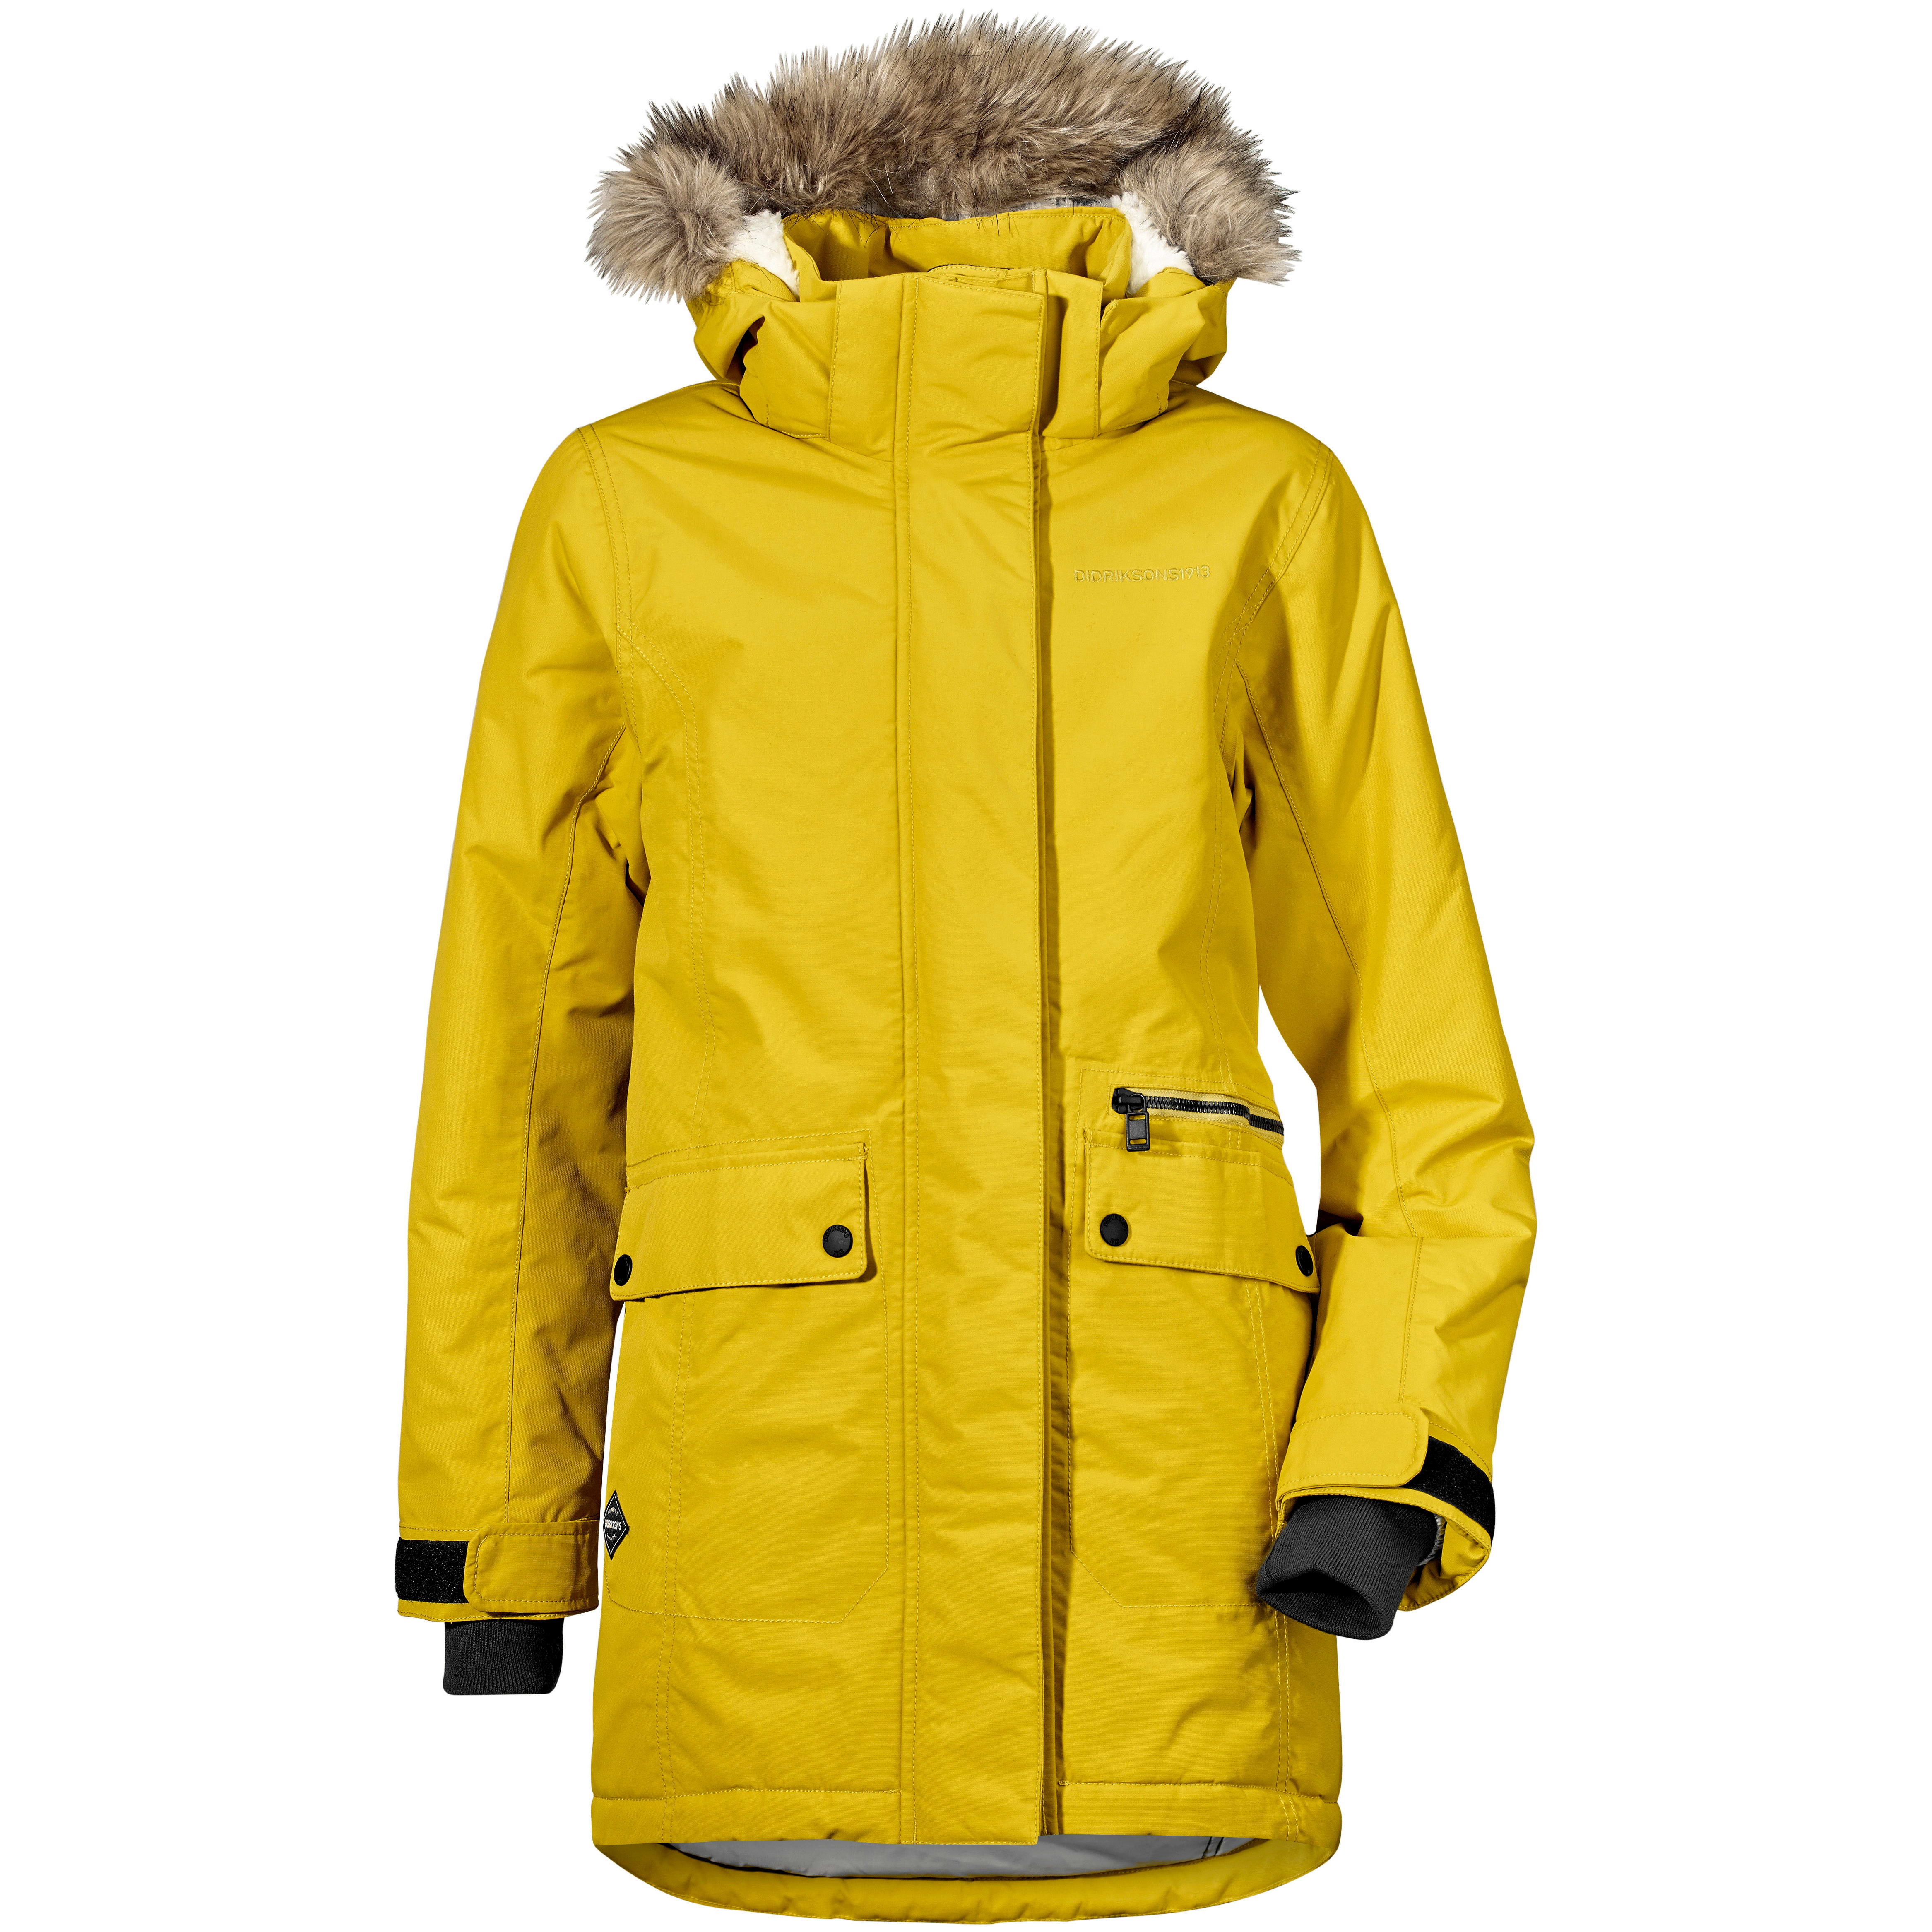 Buy Didriksons Zoe Girl's Parka from Outnorth